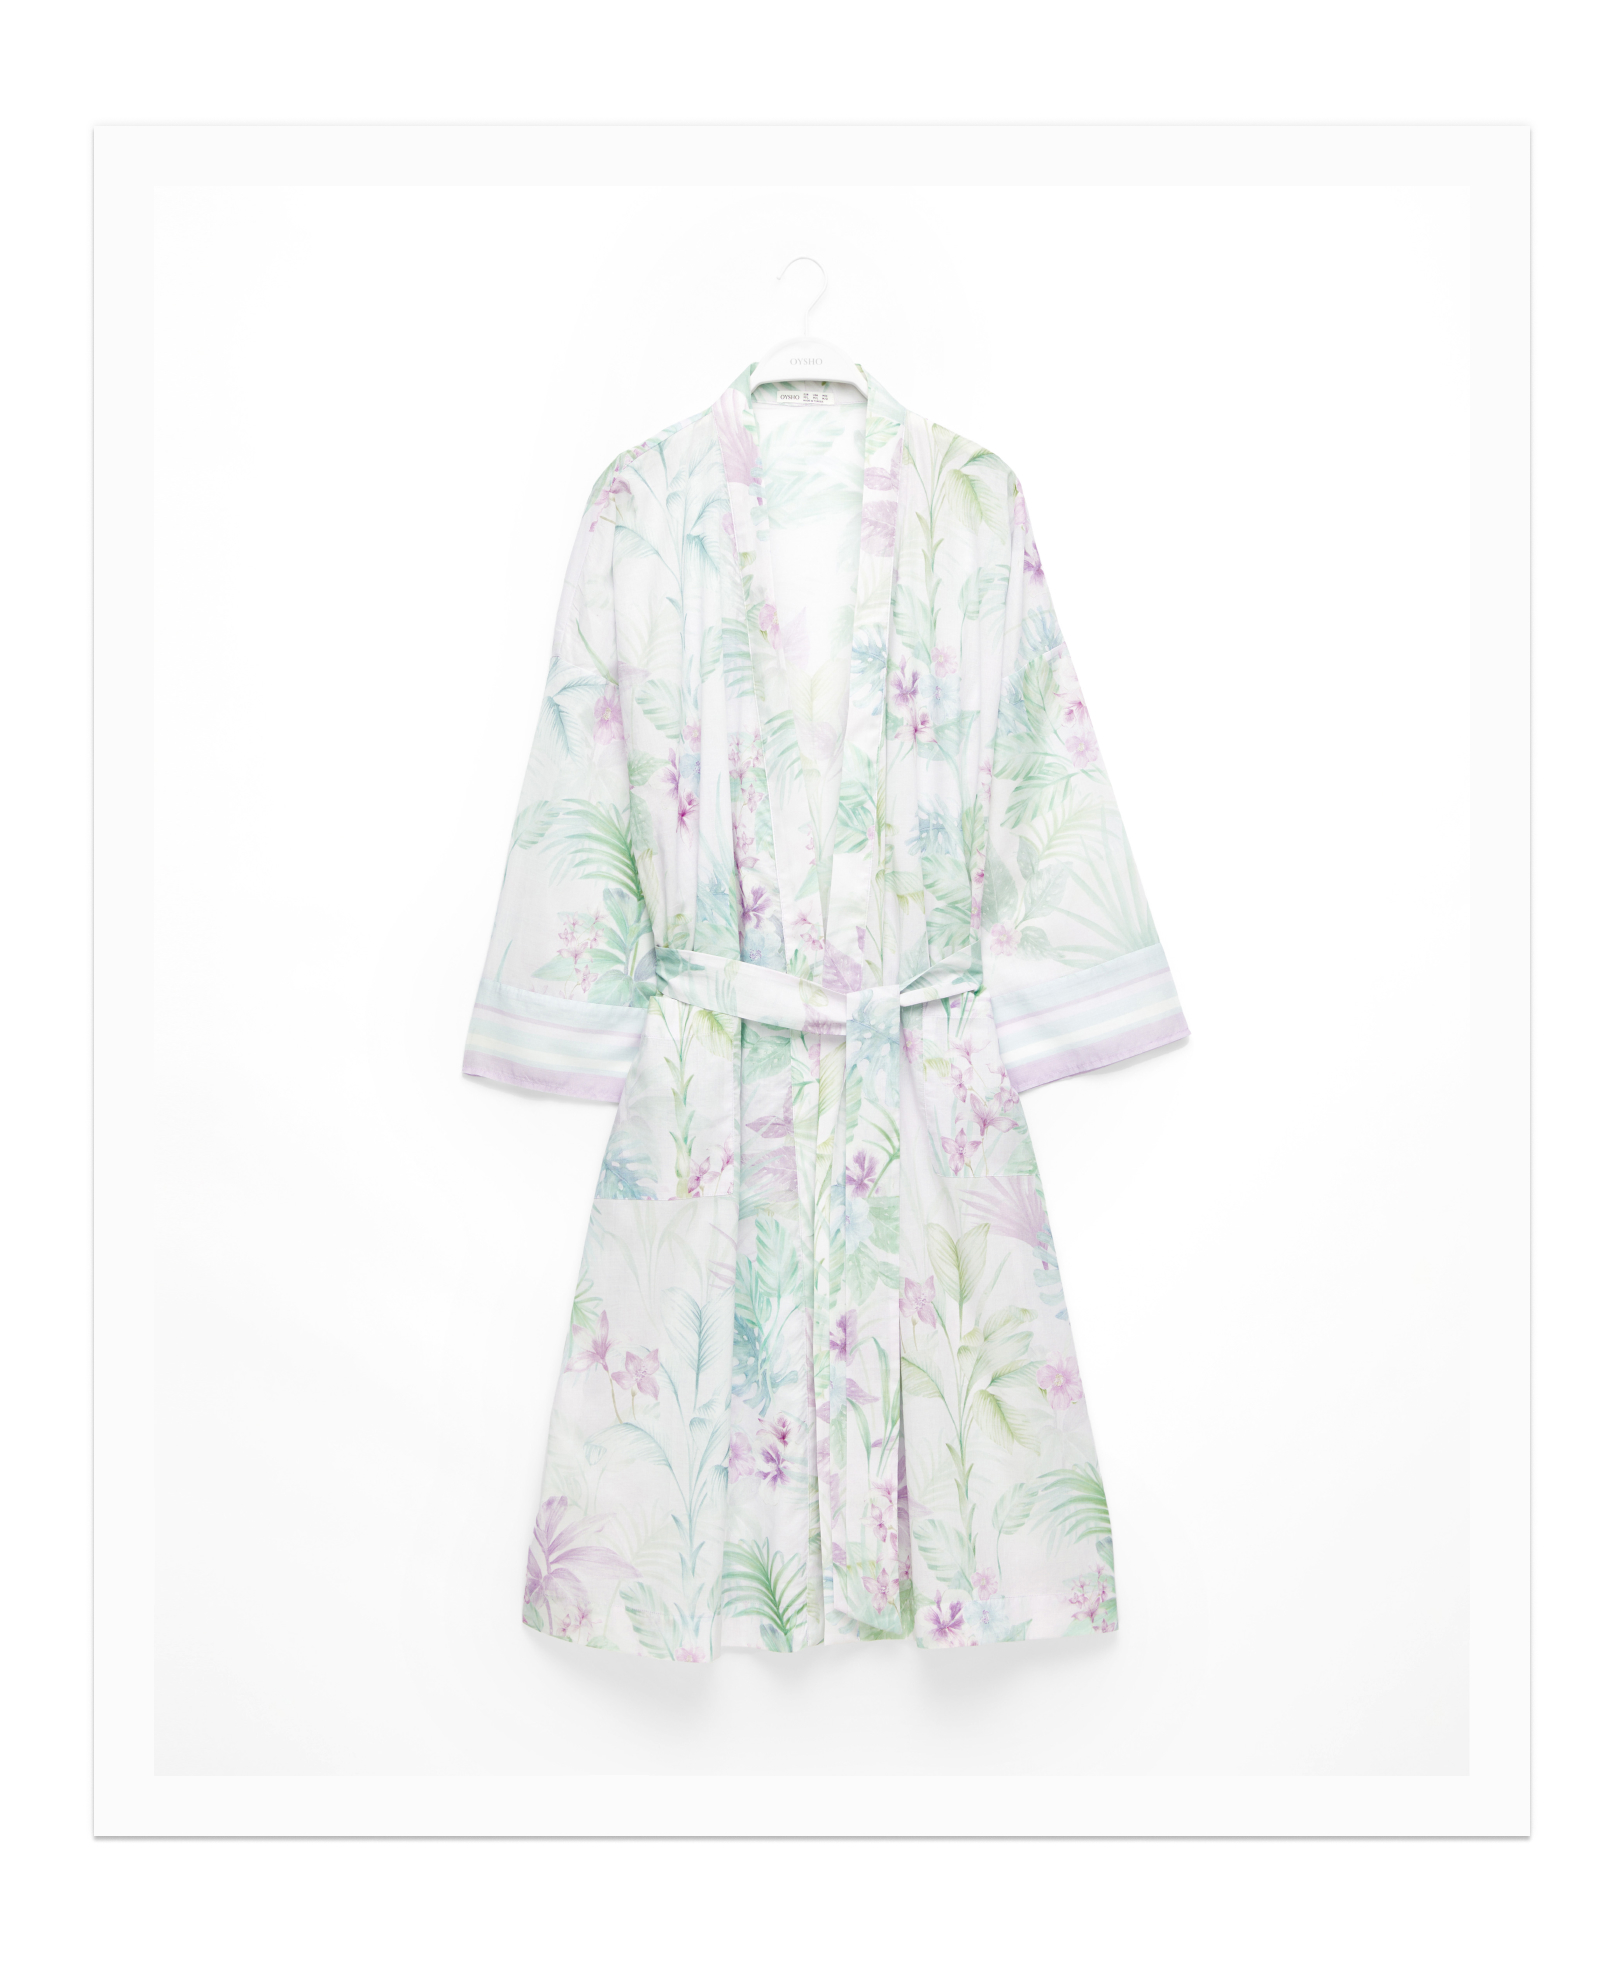 Tropical print 100% cotton dressing gown